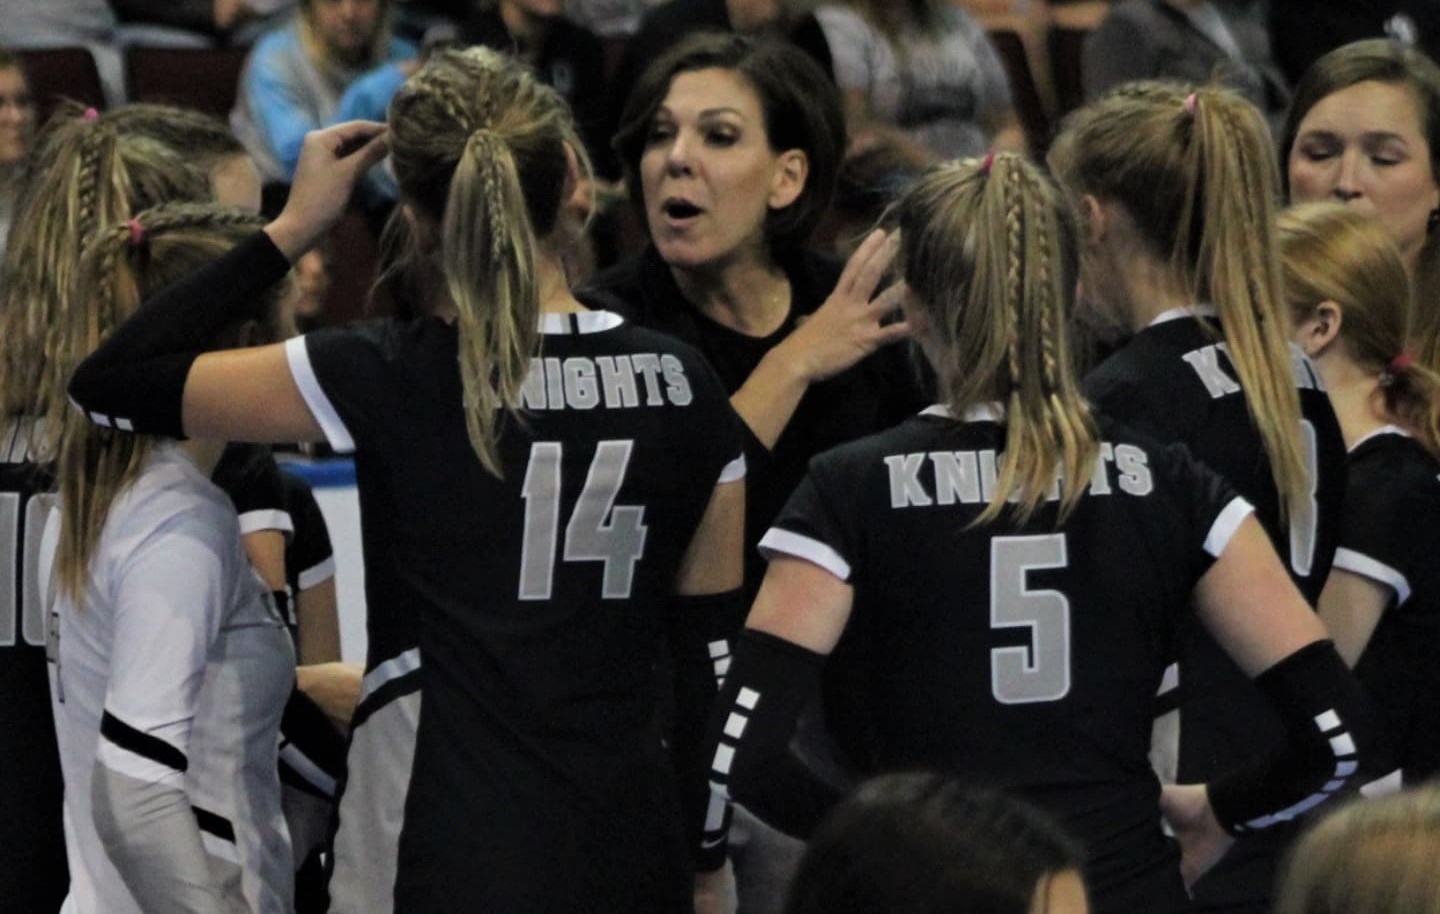 Brummet Steps Down from Lakeside Volleyball